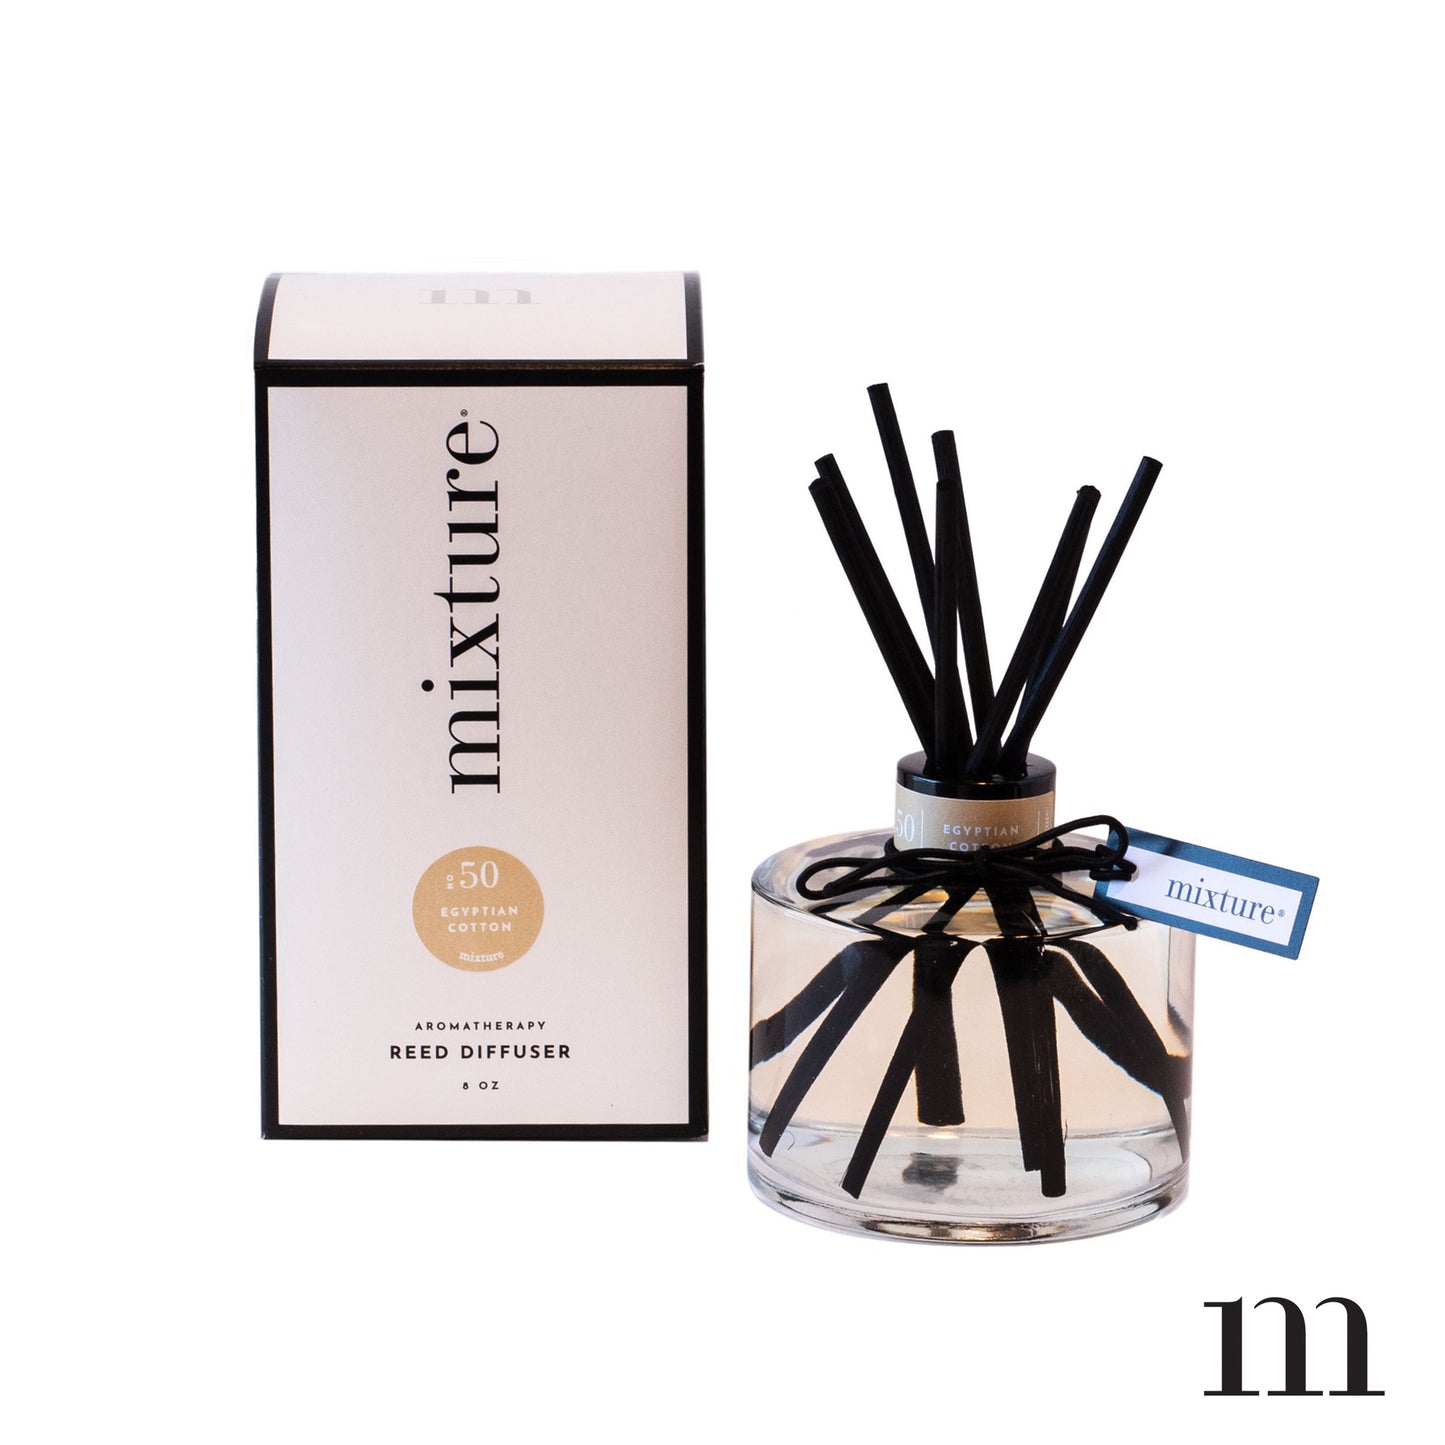 8 oz Boxed Reed Diffuser